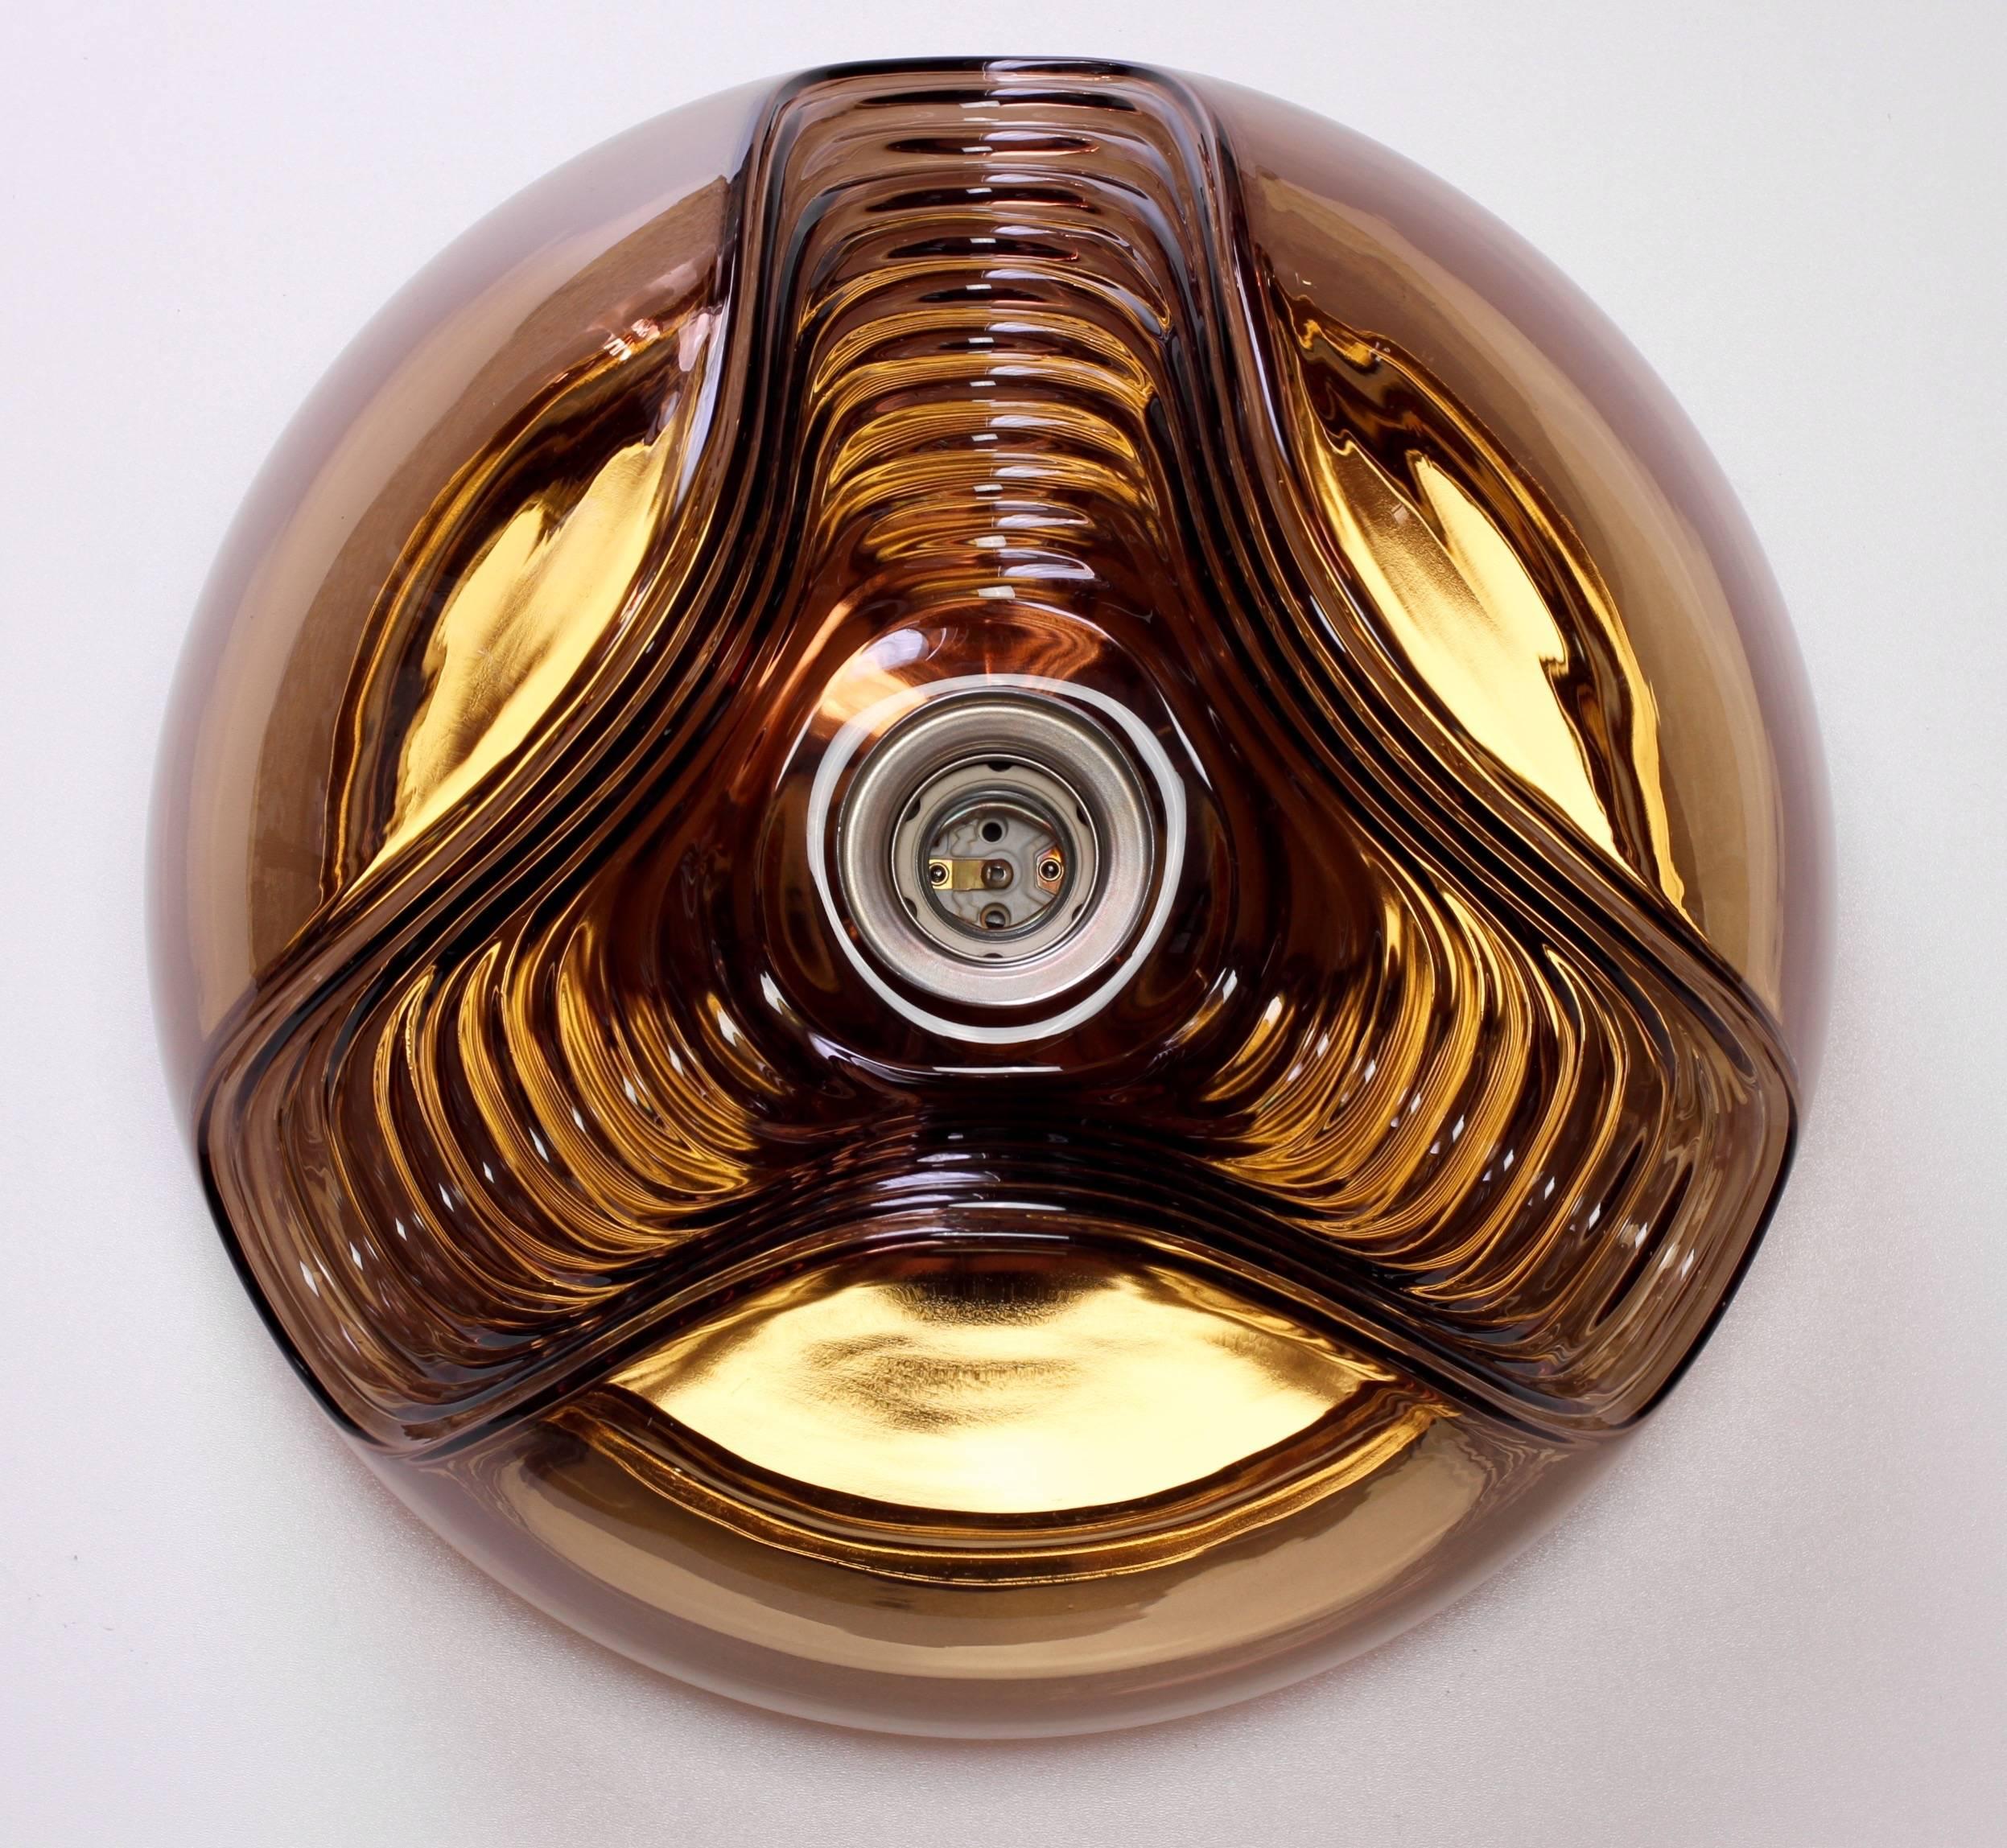 Mid-Century pair of flush mount wall lights or sconces designed by Koch & Lowy for Peill & Putzler in the 1970s. This is an absolutely classic piece of German design, featuring a smoked toned colored glass globe shade with a waved/ribbed molded